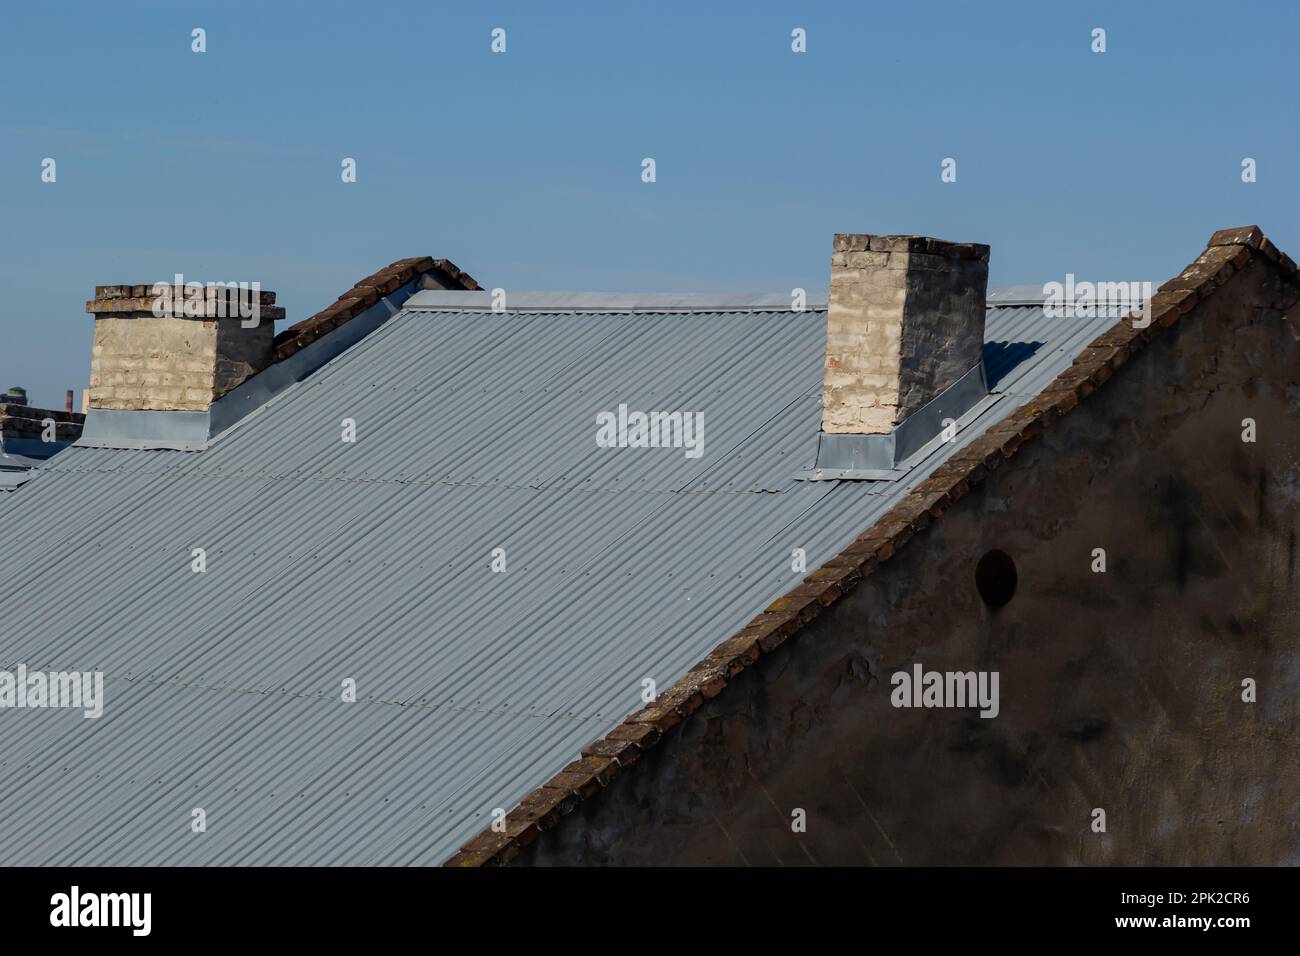 Roof of a new home. Ceramic chimney, metal roof tiles, gutters, roof window. Single family house. Stock Photo